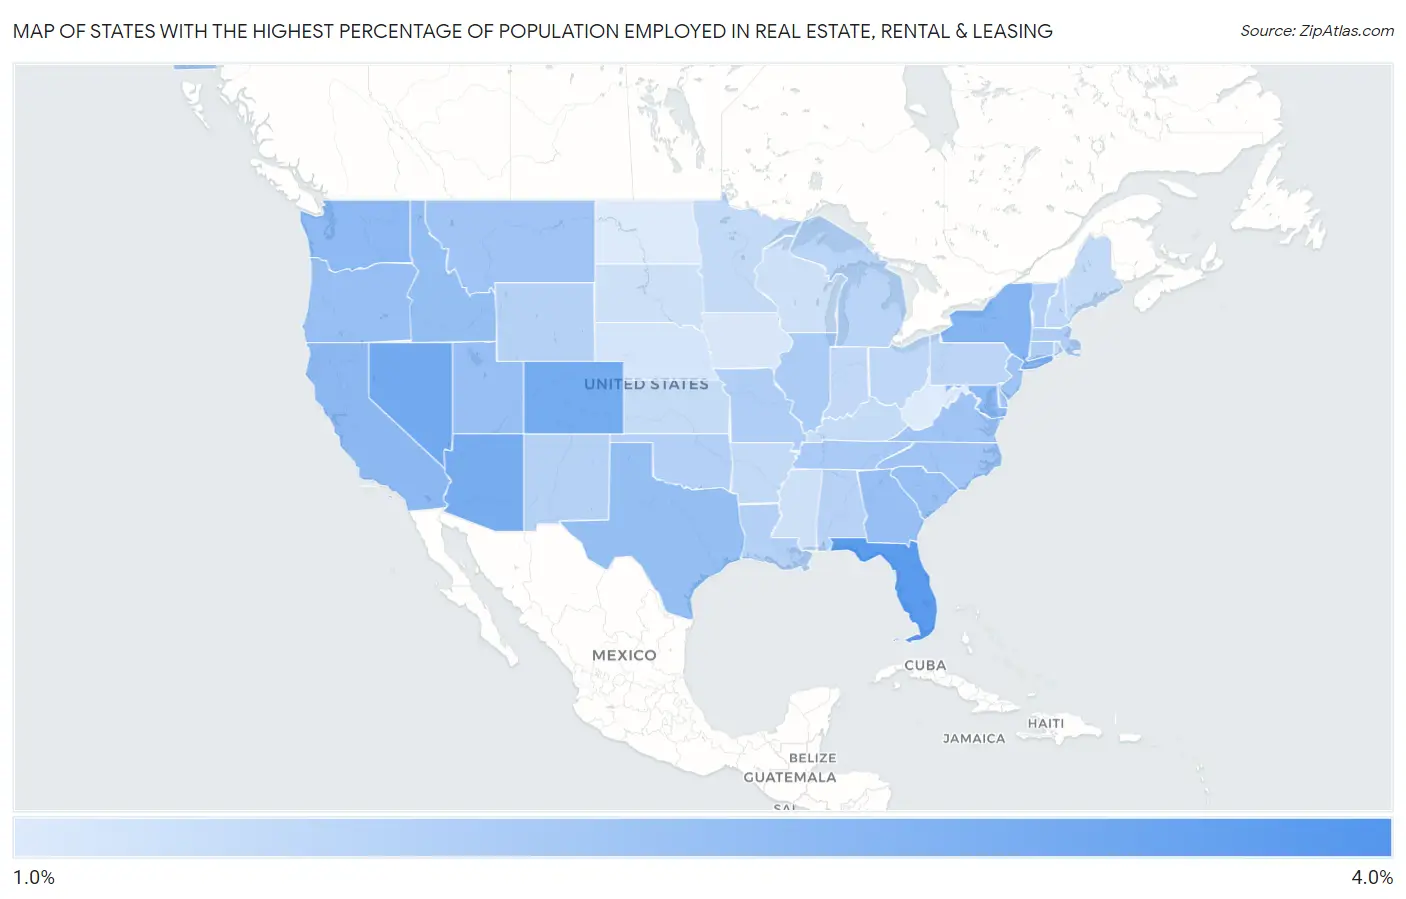 States with the Highest Percentage of Population Employed in Real Estate, Rental & Leasing in the United States Map